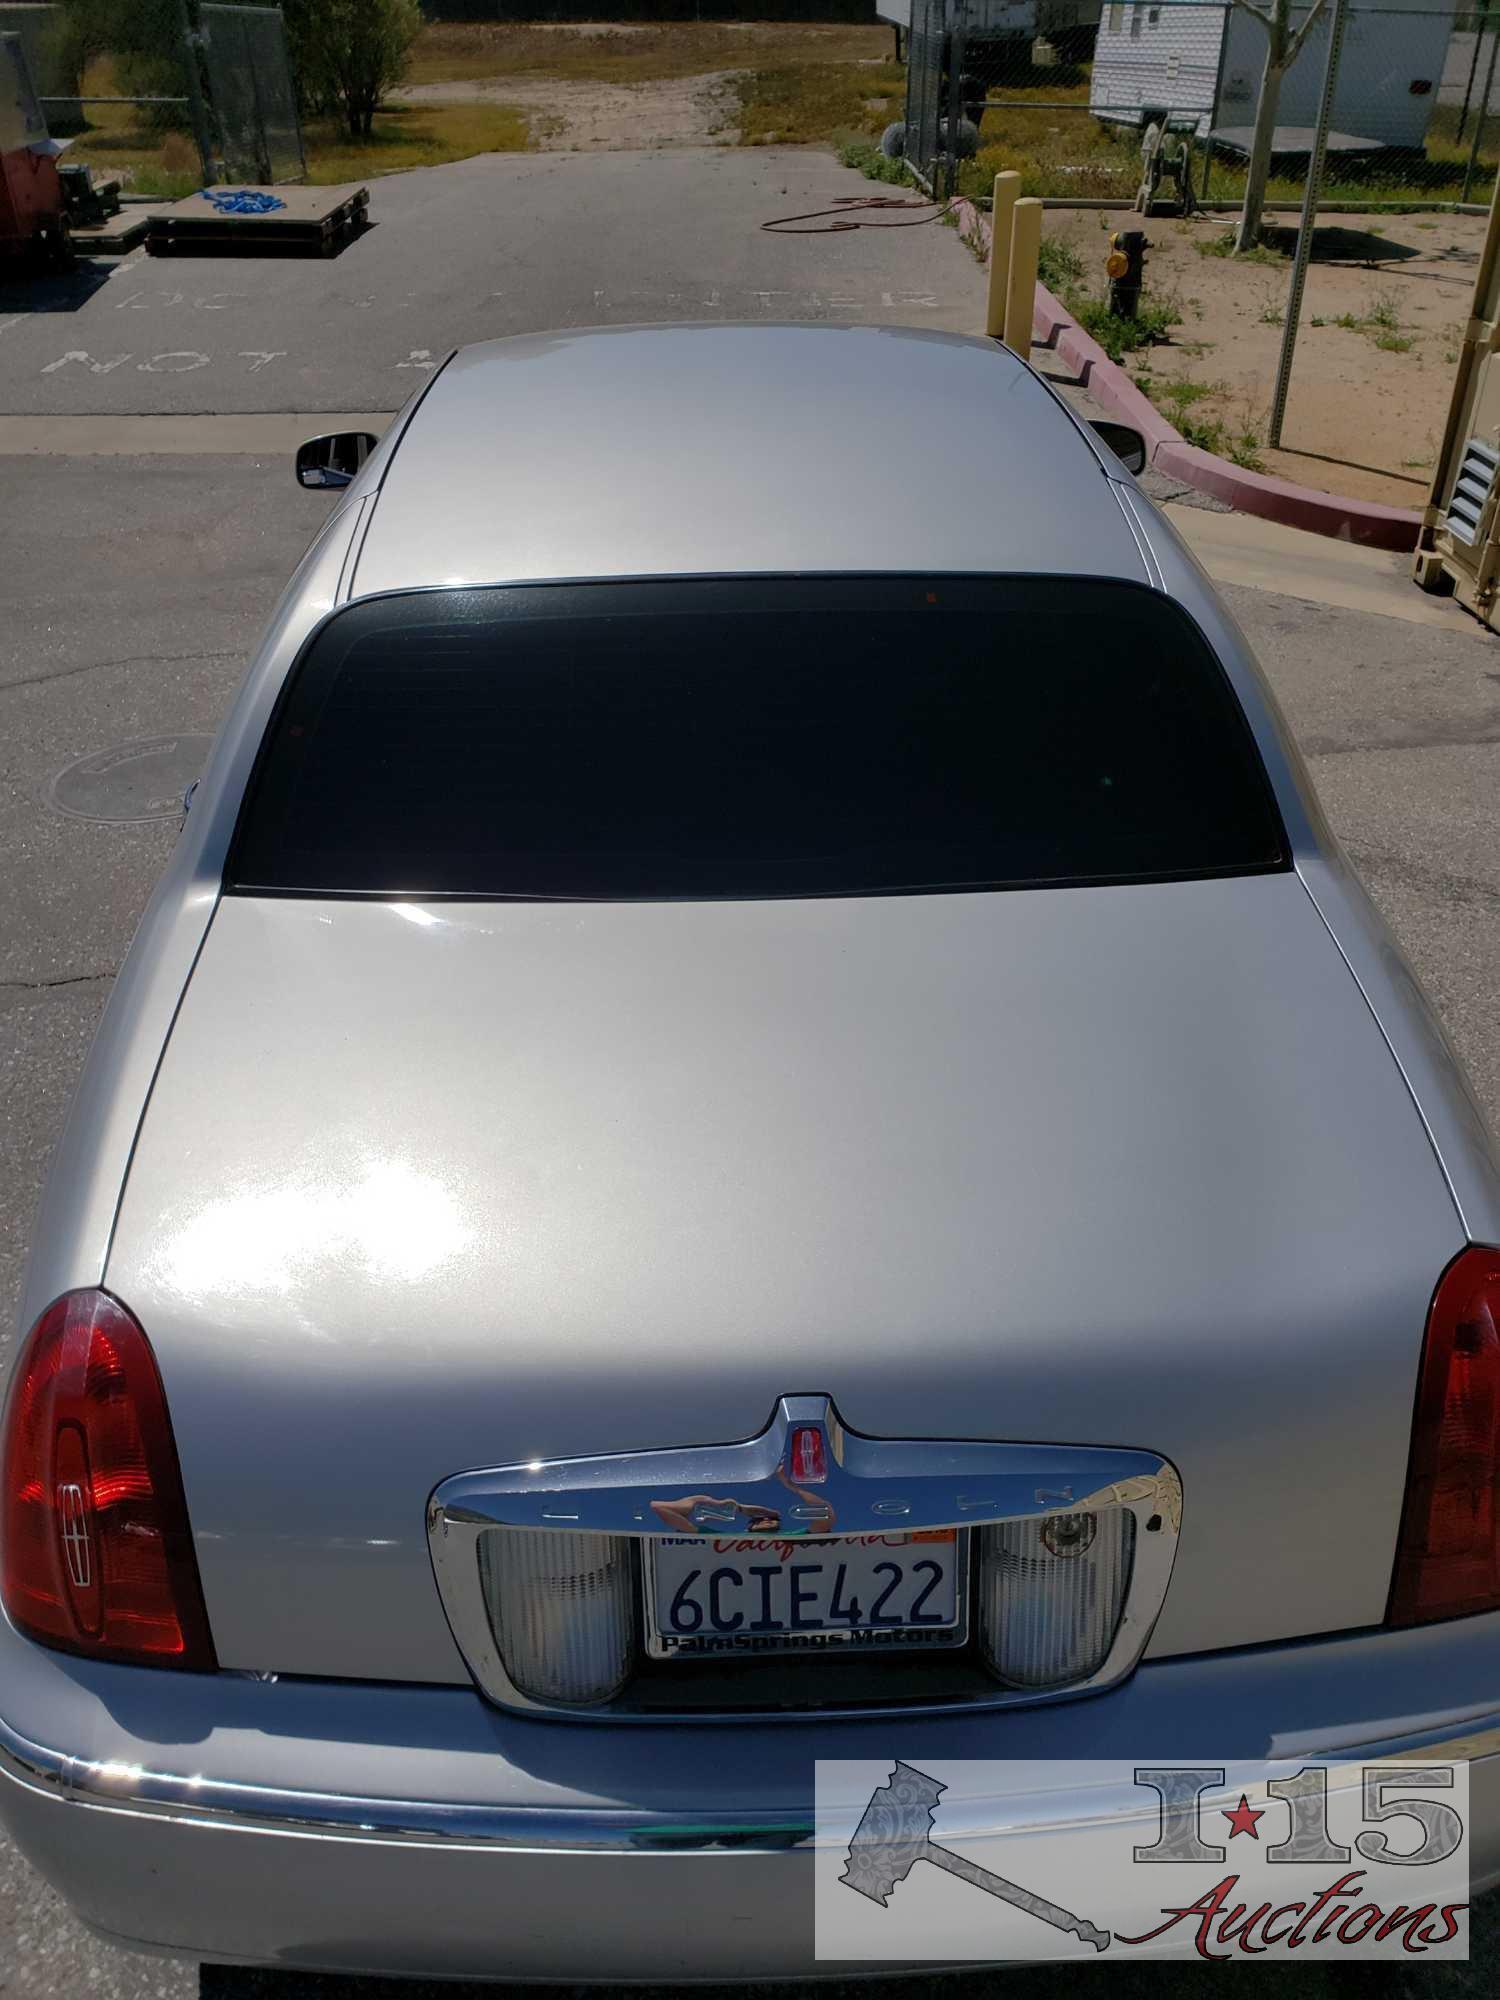 1999 Lincoln Towncar Silver With Current Smog!!